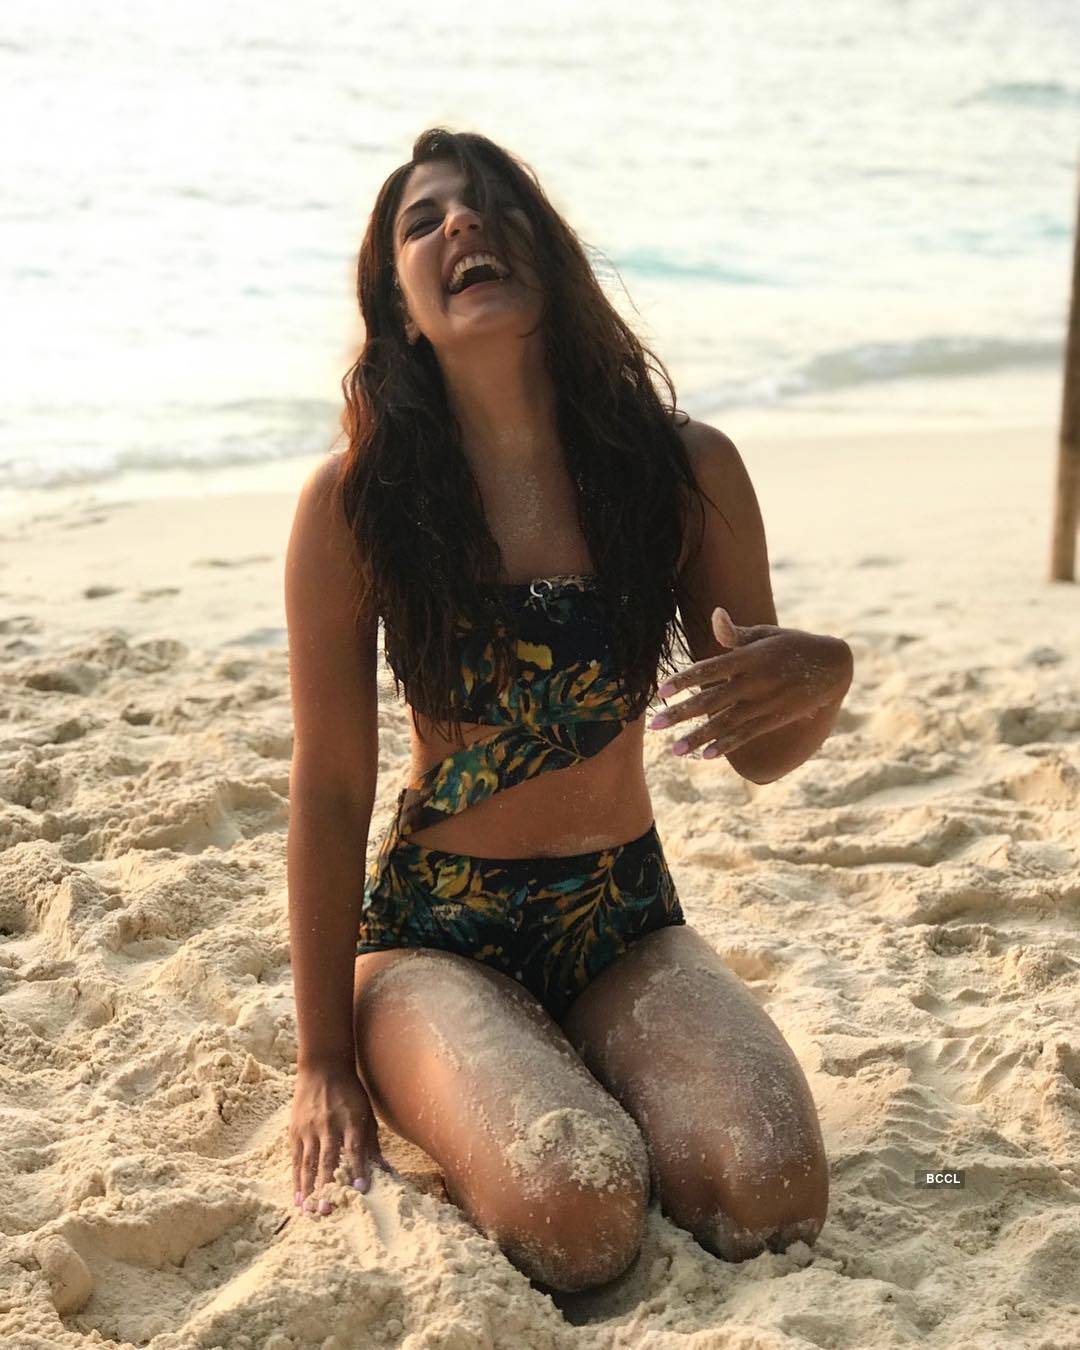 Rhea Chakraborty is turning up the heat with her captivating photoshoots